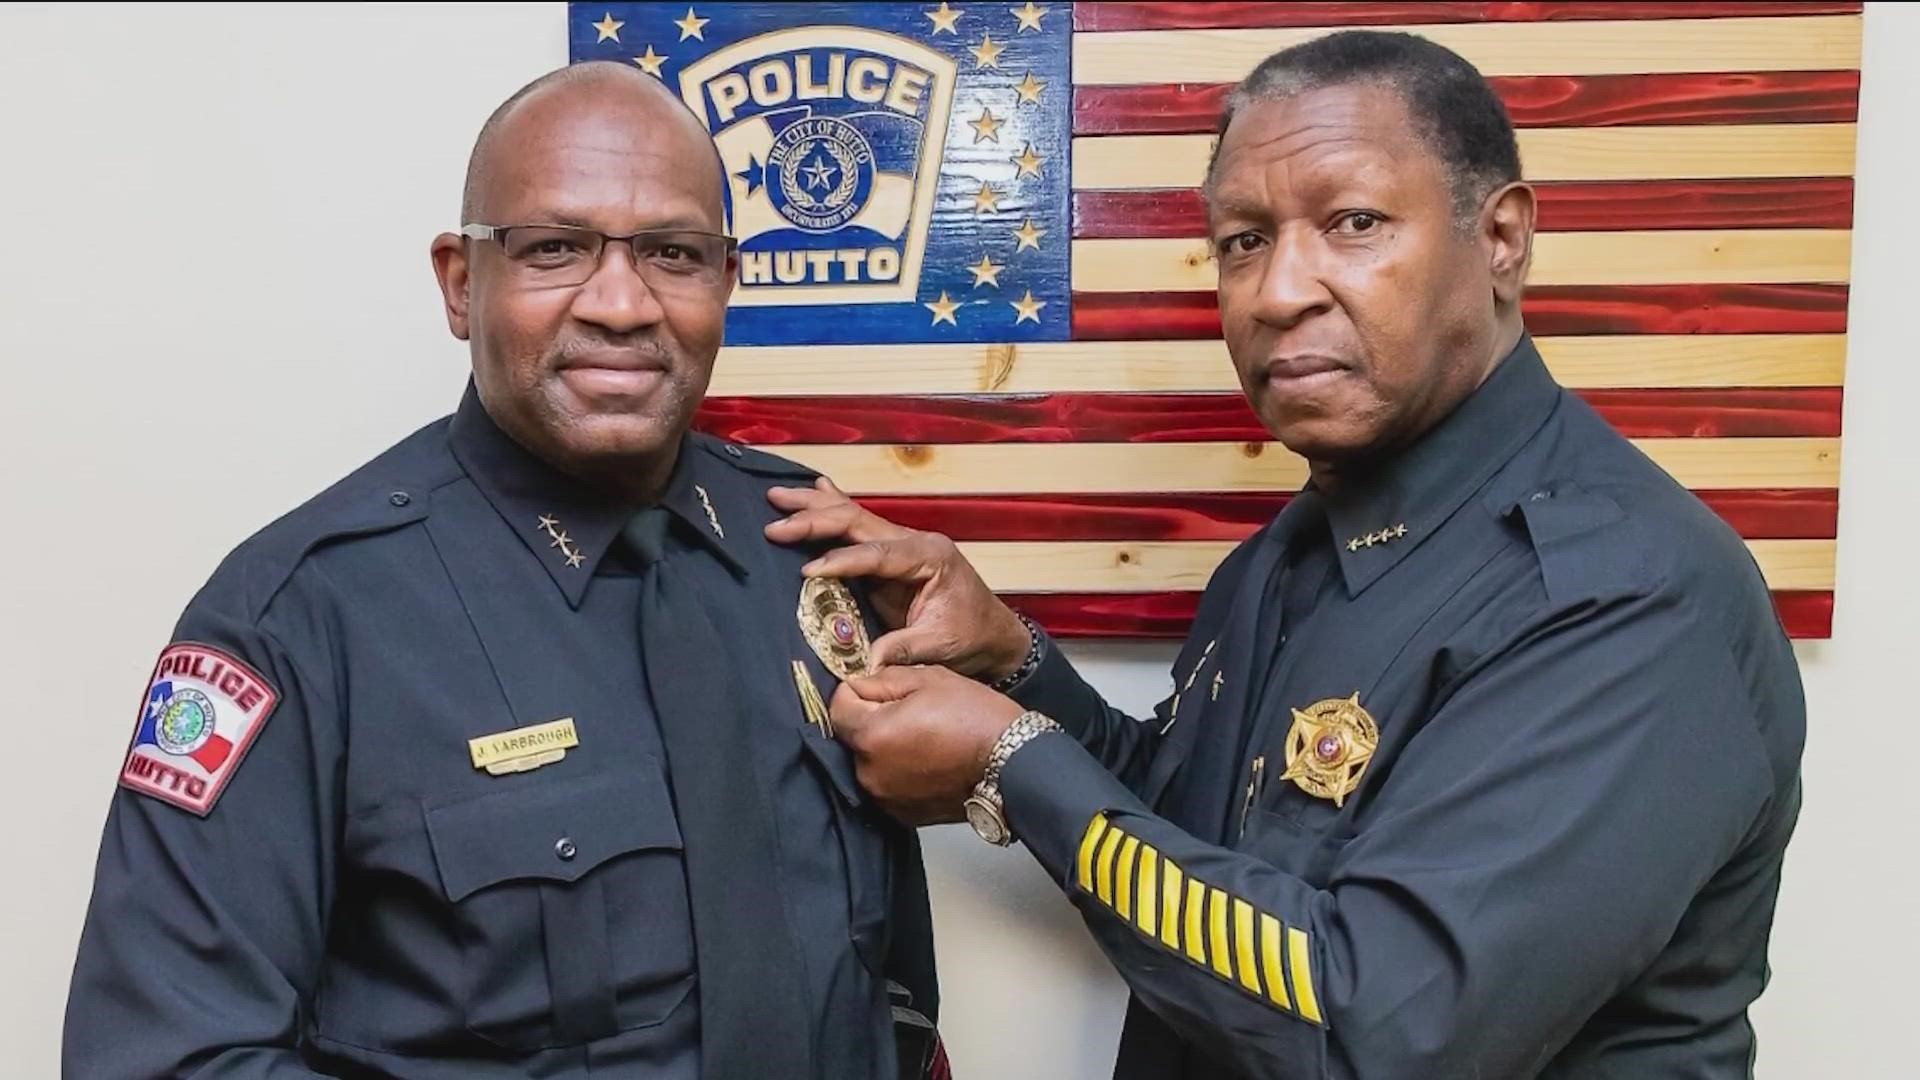 Less than a year ago, the Hutto Police Department made history with a new hire. KVUE's Dominique Newland introduces us to Chief Jeffrey Yarbrough.